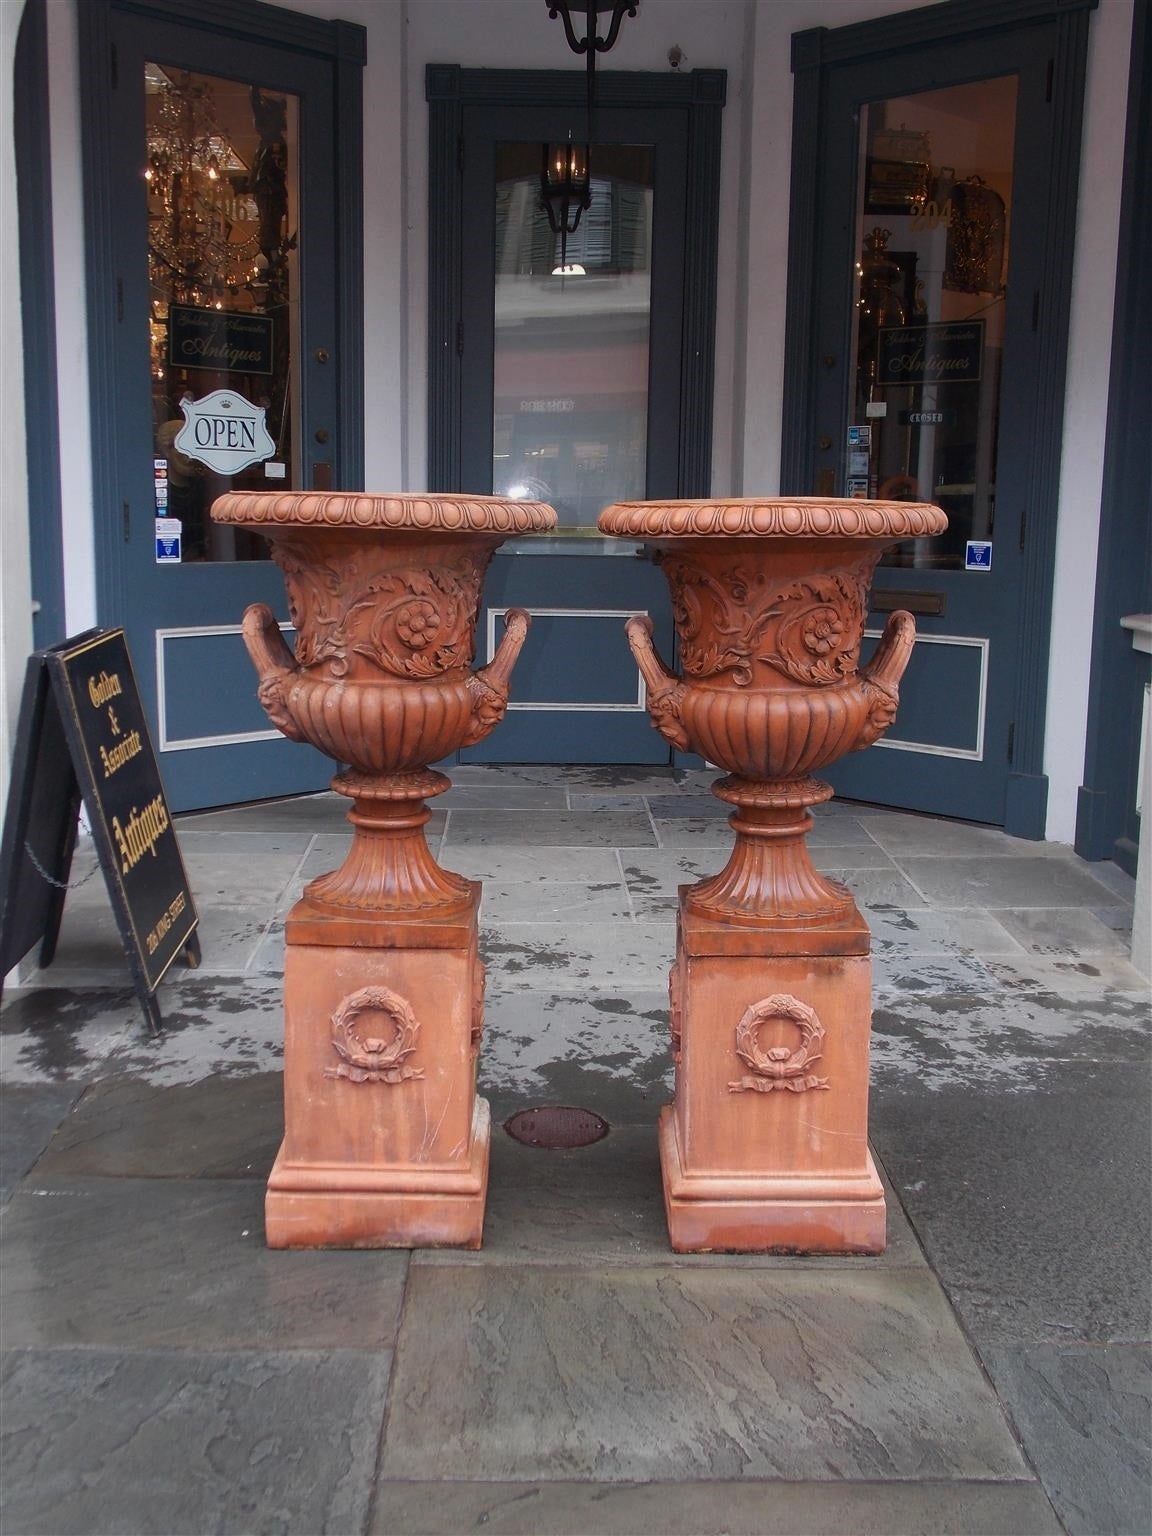 Pair of Italian terracotta urns with egg and dart molded edge, scrolled acanthus floral motif, molded side handles with figures of Bacchus and terminating on reeded and fluted circular bases resting on squared plinths with decorative laurel wreath